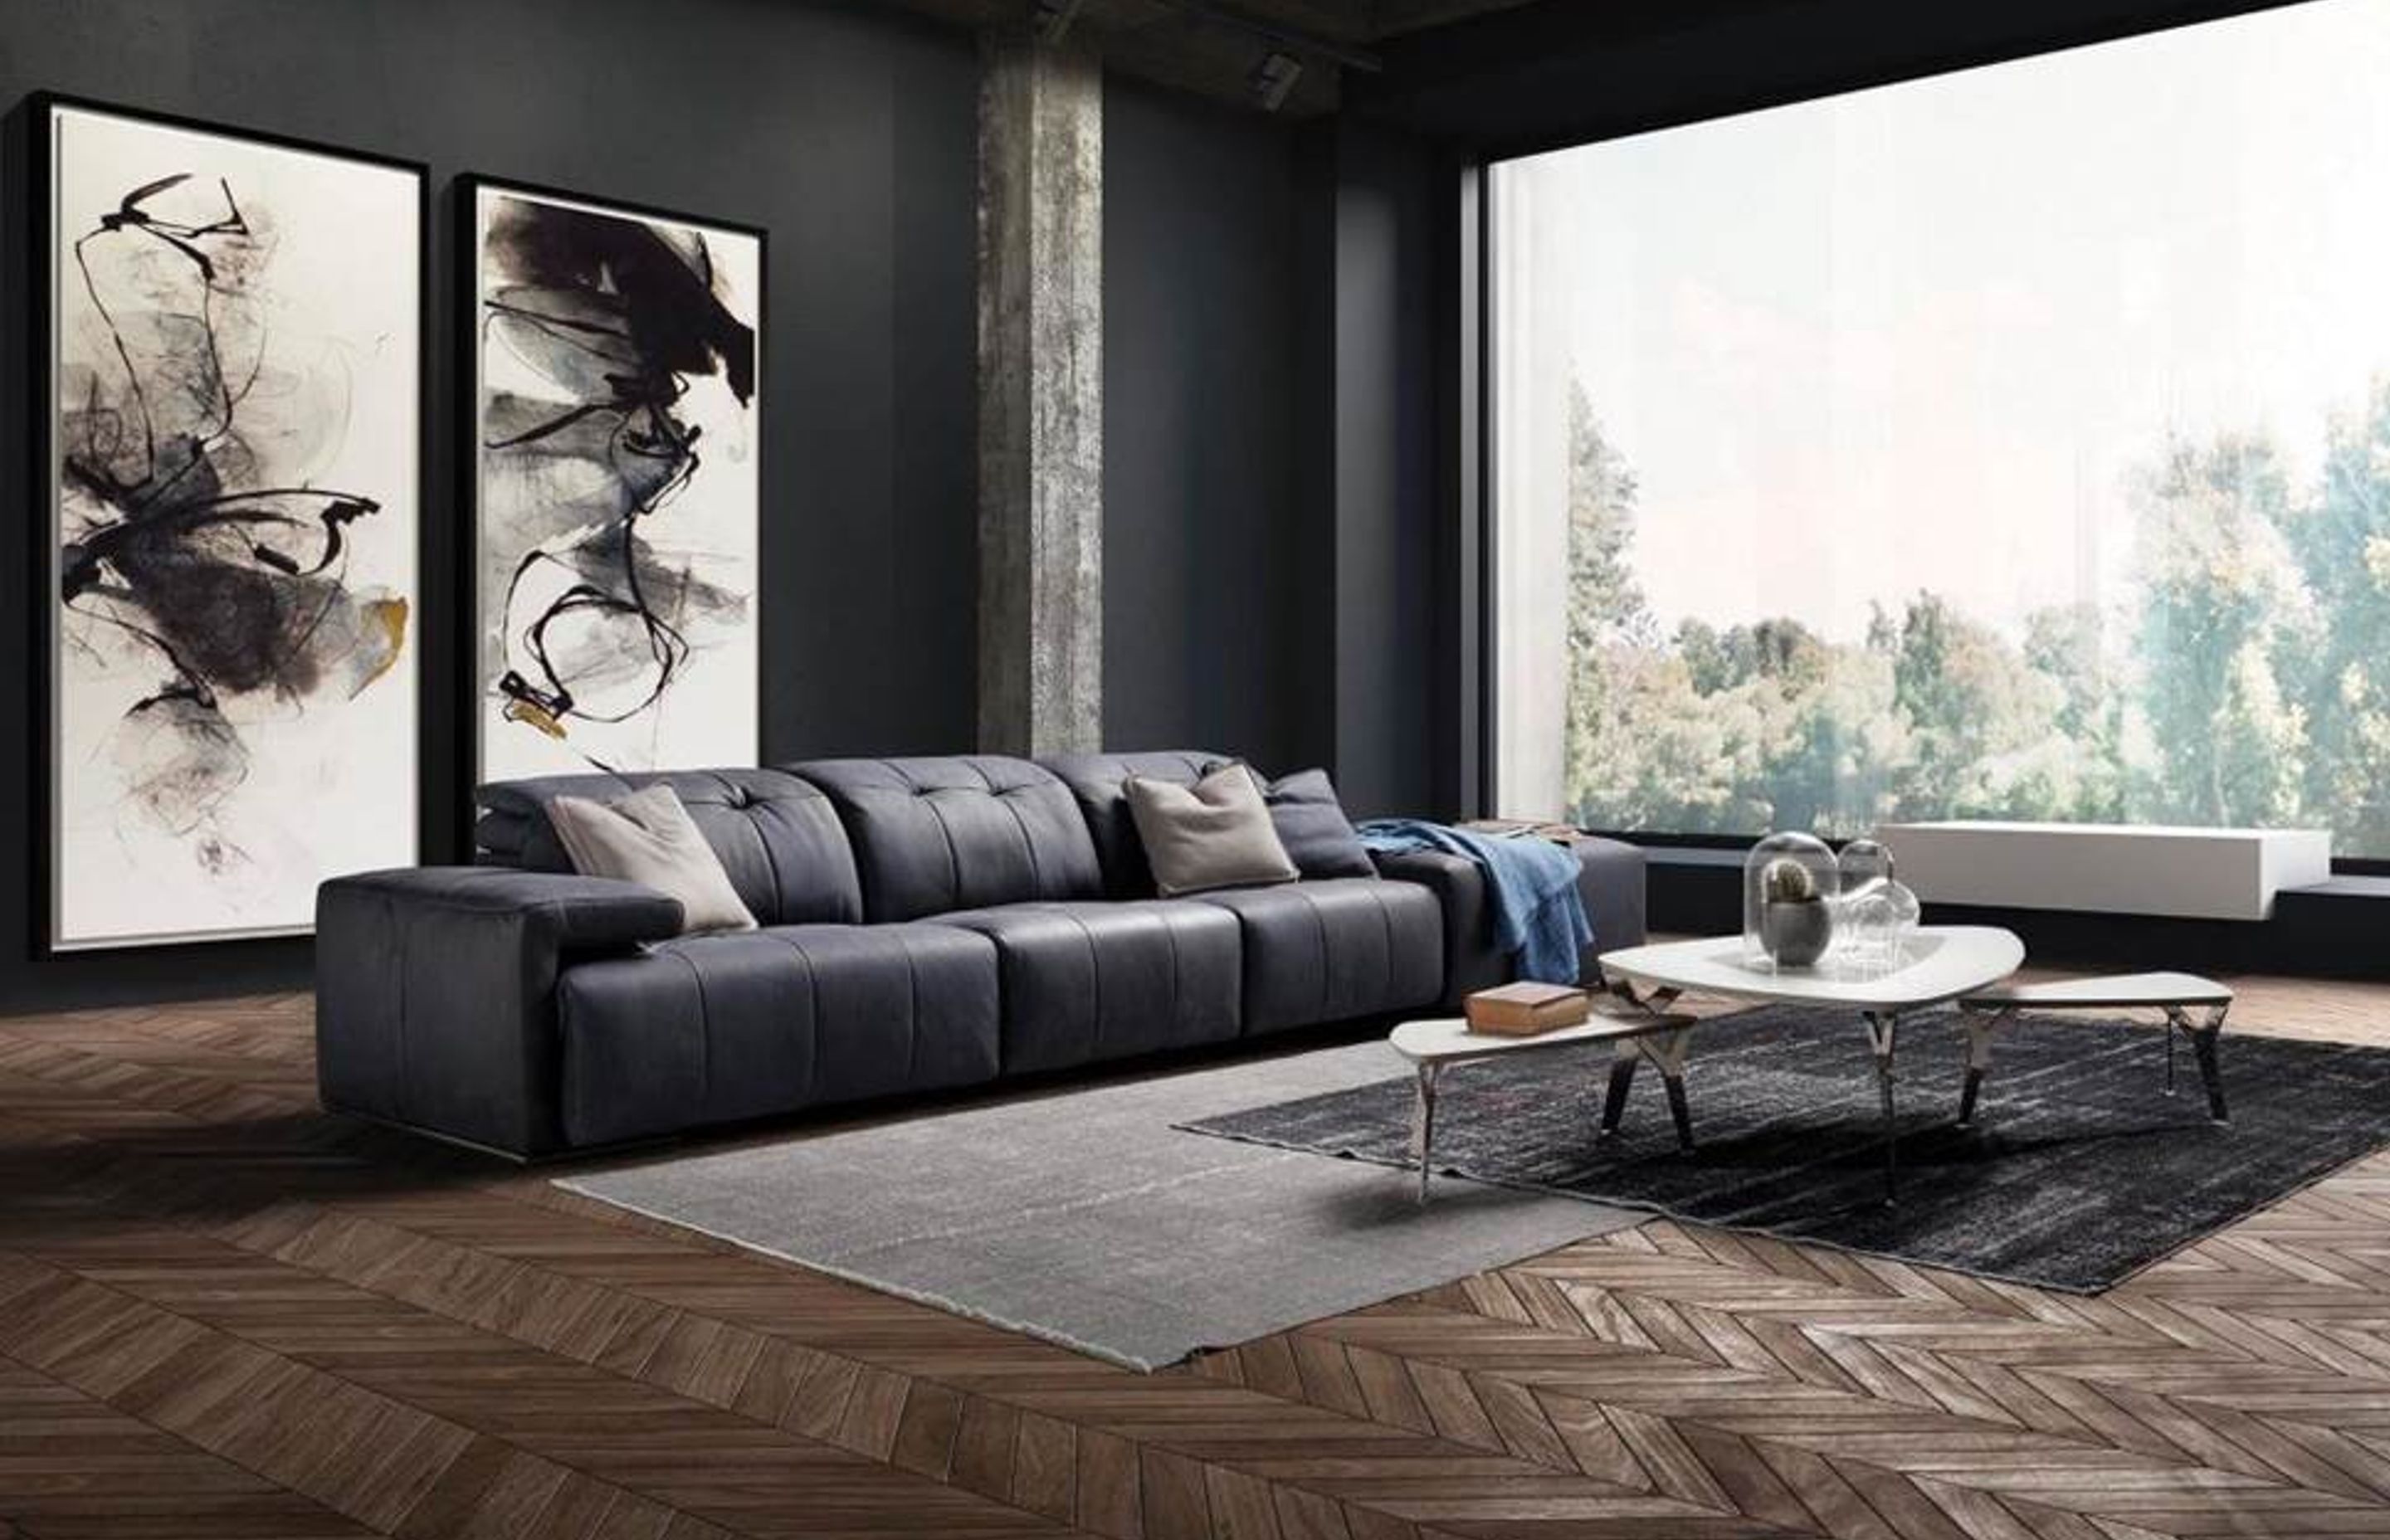 The Arcadia lounge suite by Saporini is presented in a soft, tactile leather and luxurious comfort.